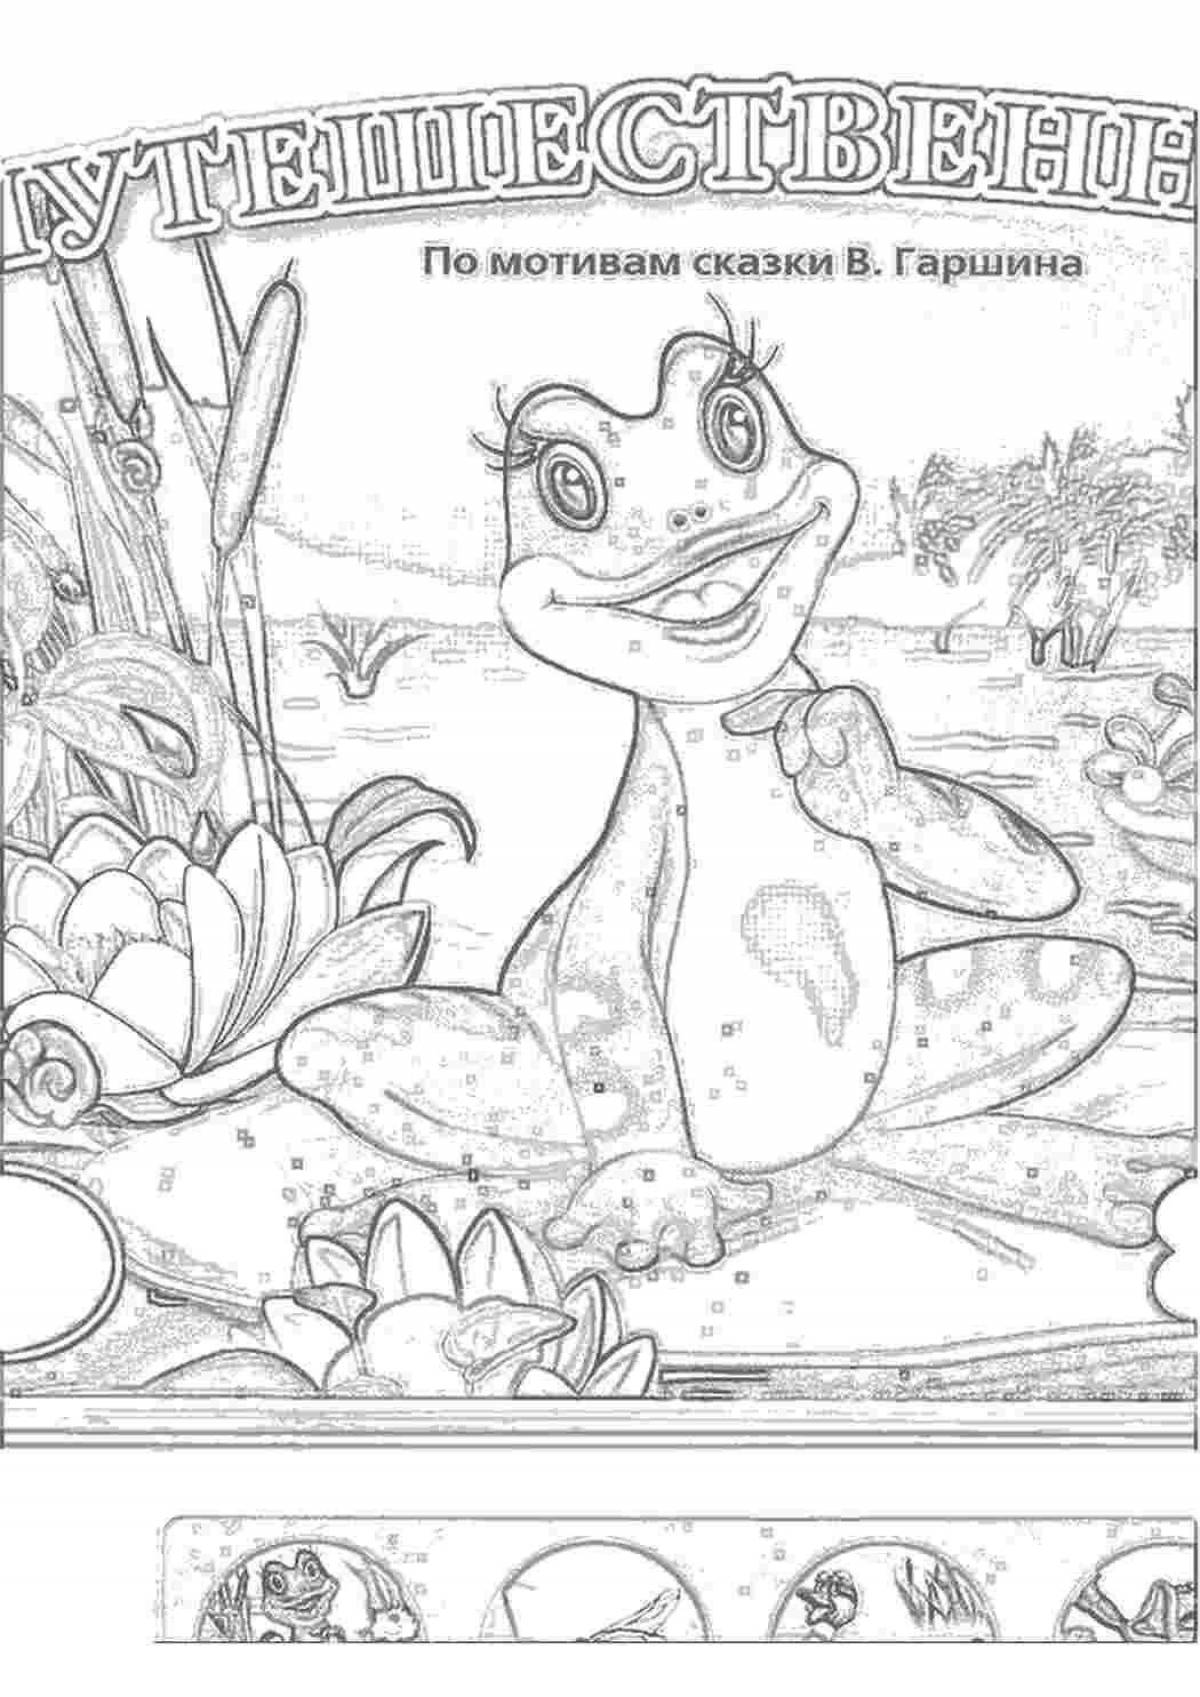 Fun travel frog coloring book for kids